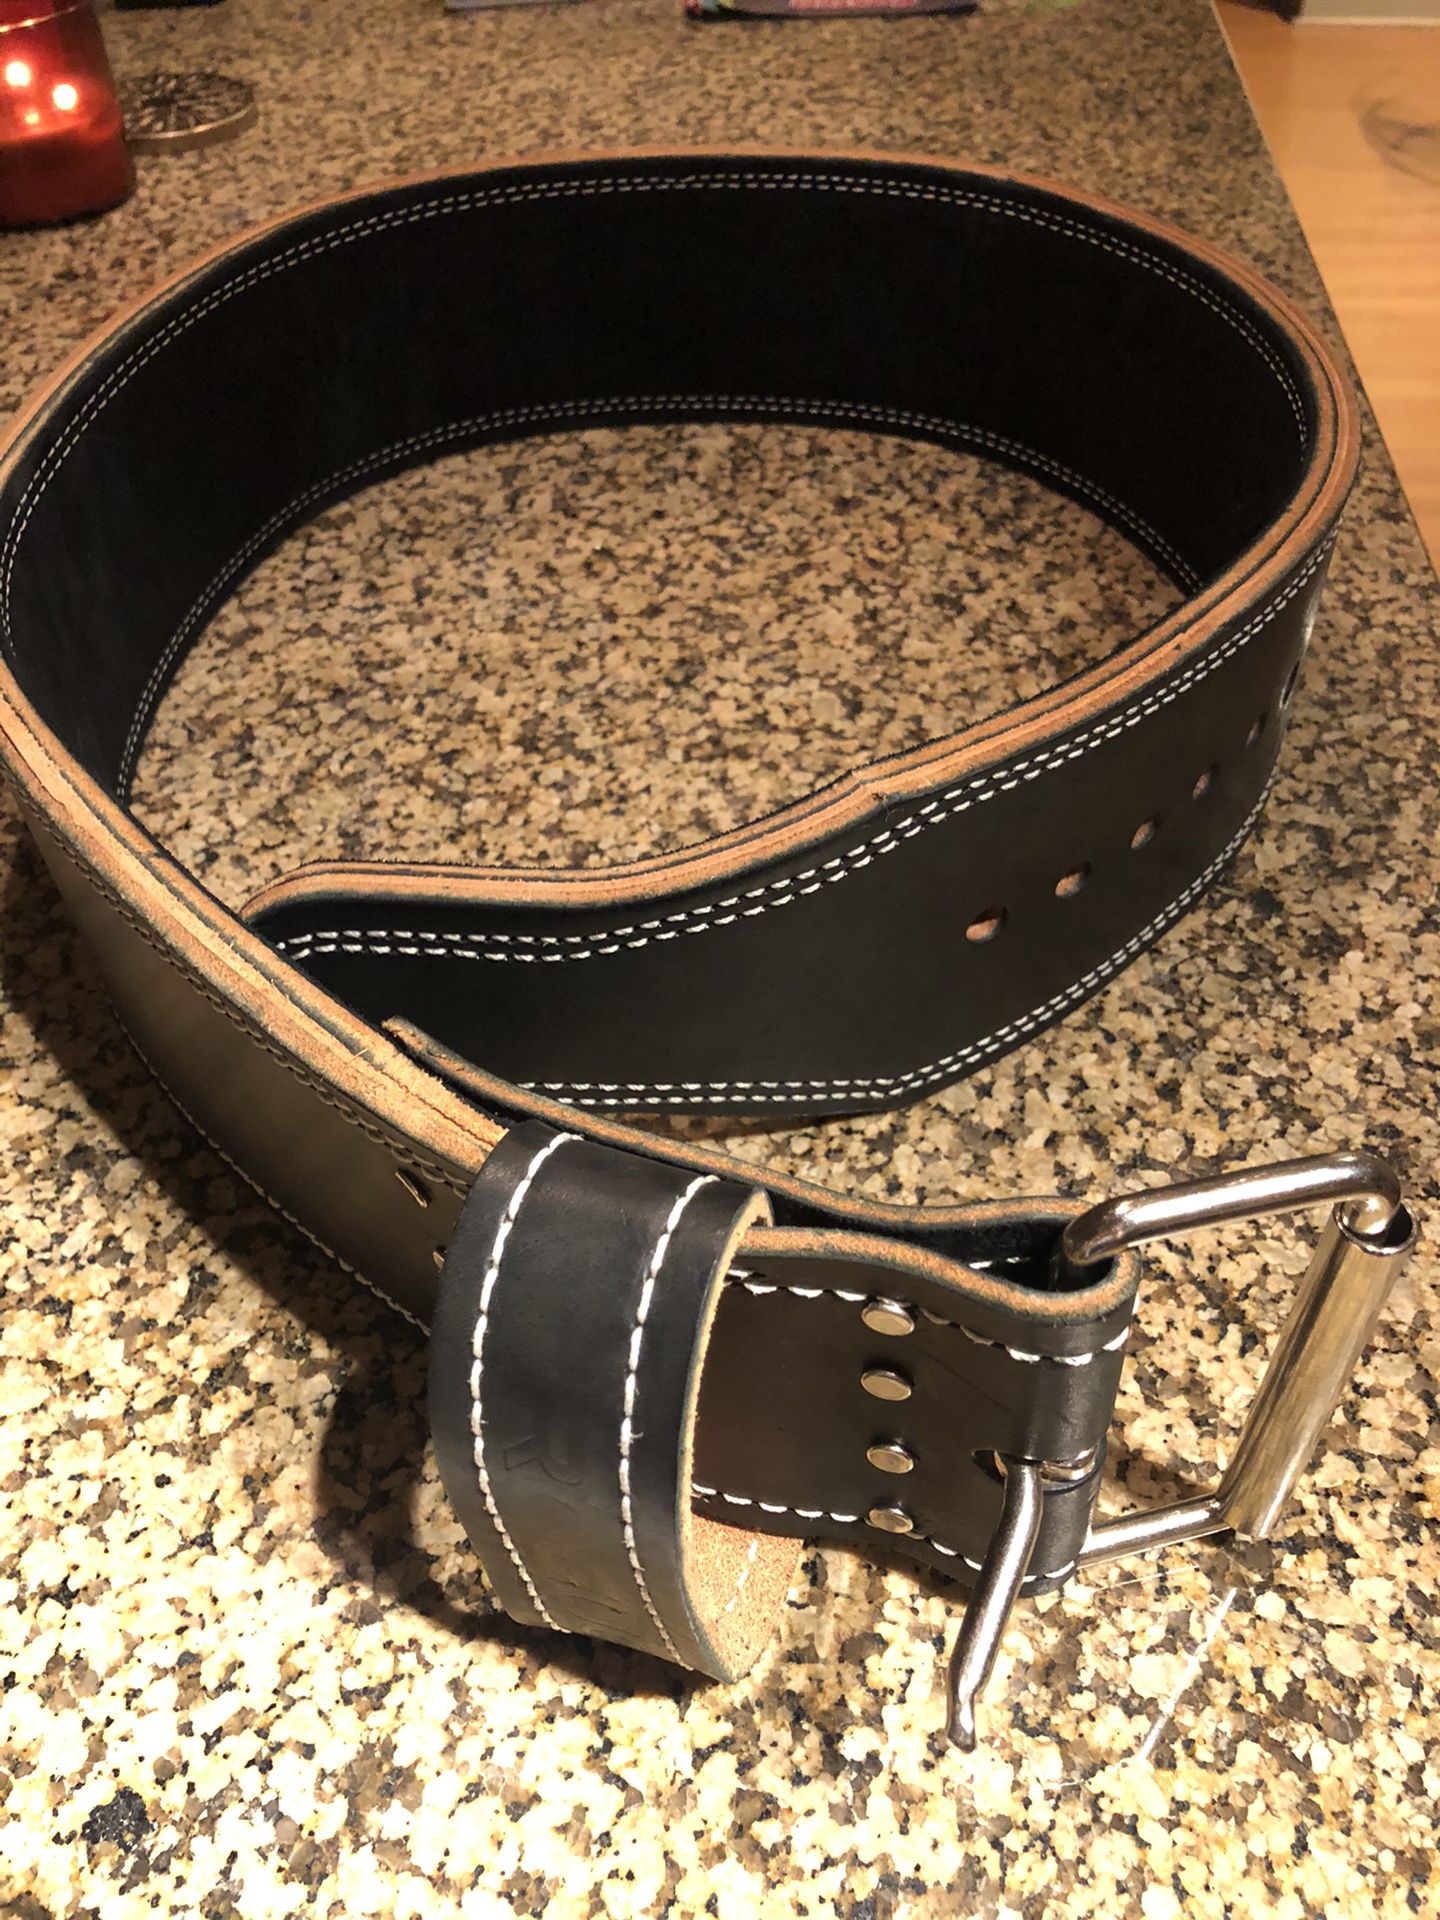 Rogue 13mm powerlifting belt for Sale in Houston, TX - OfferUp